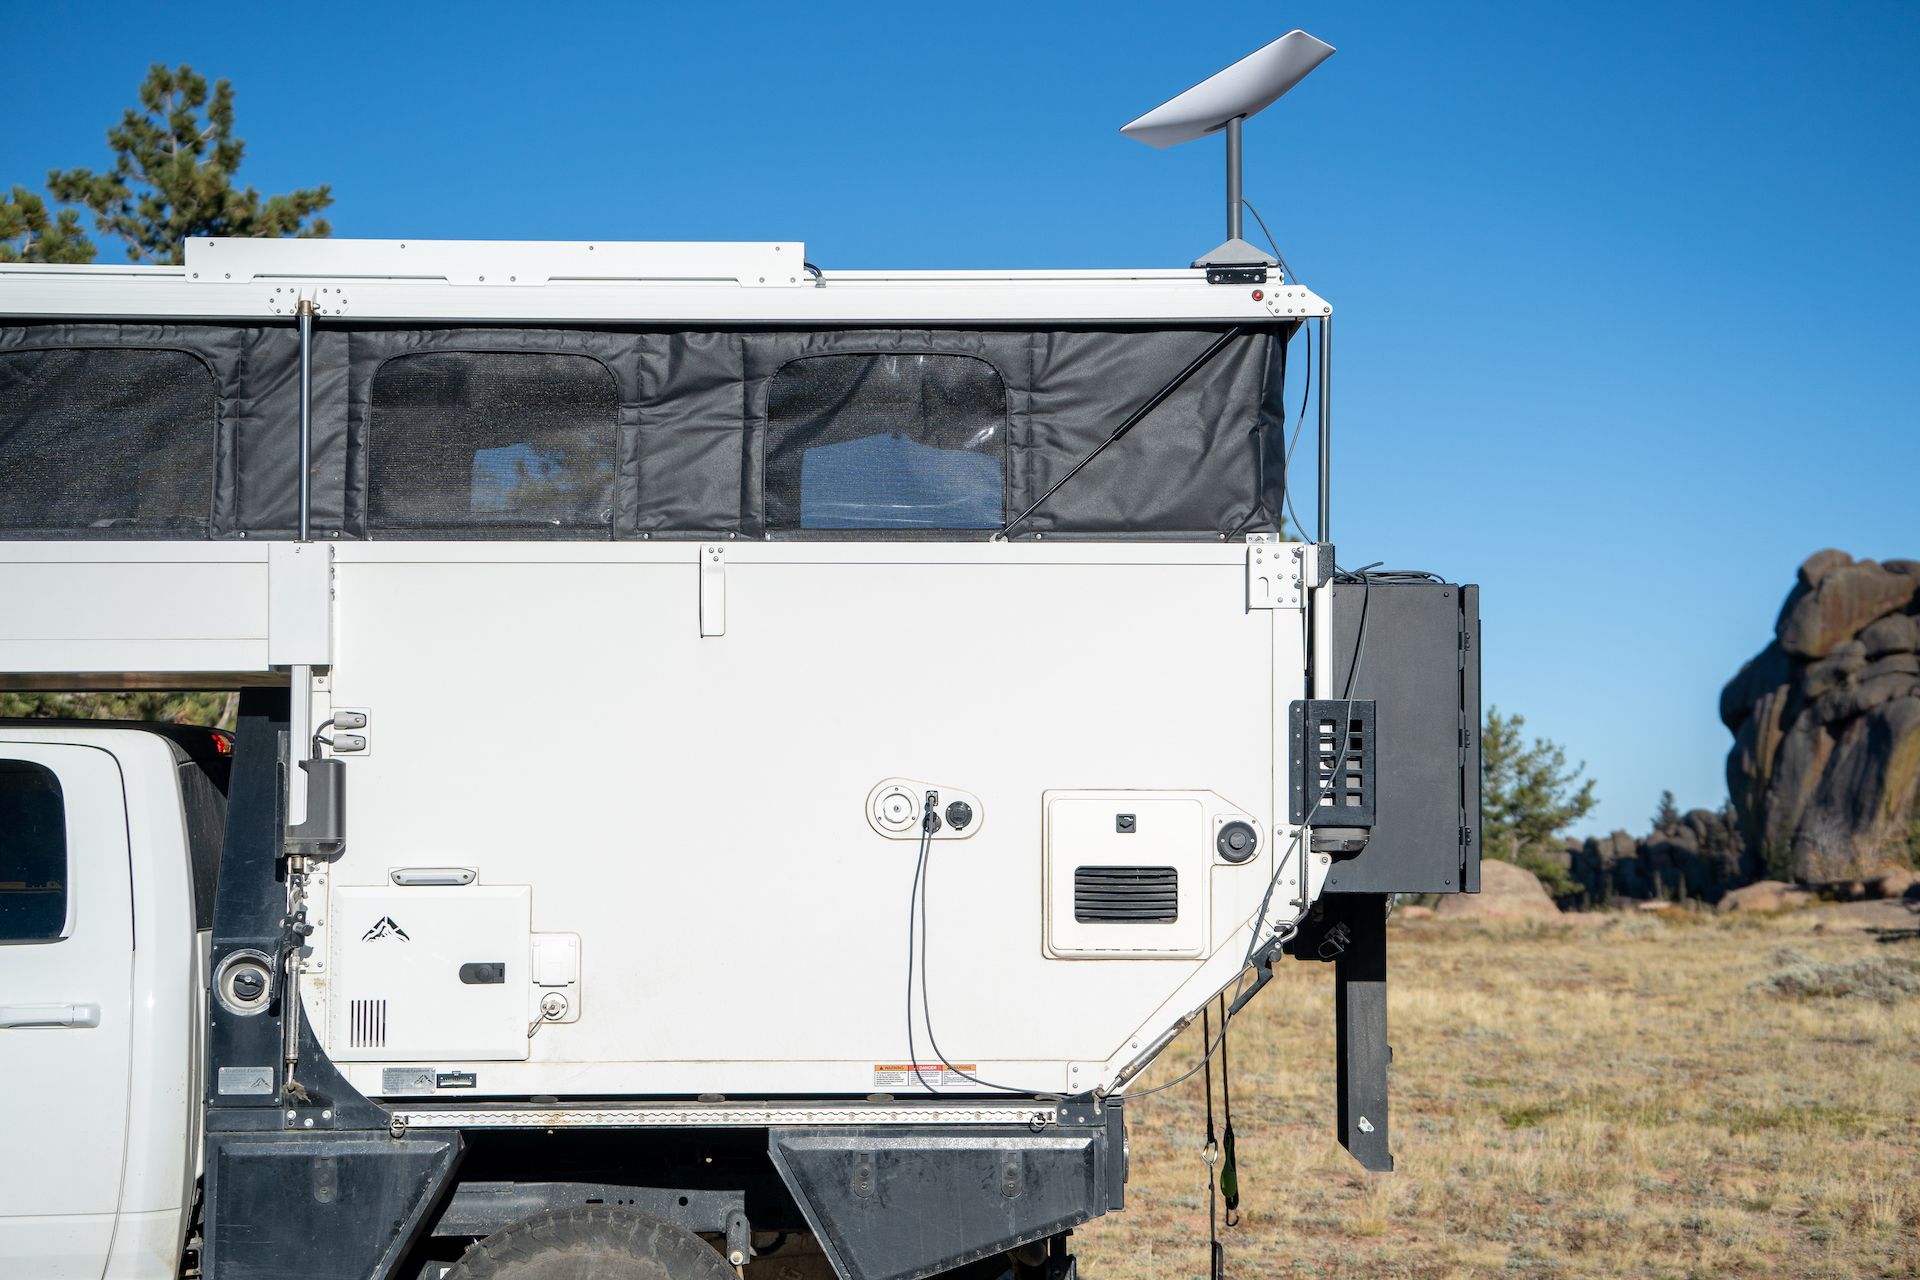 The dish mounted to the roof of the camper and wired to the router via the external connector.